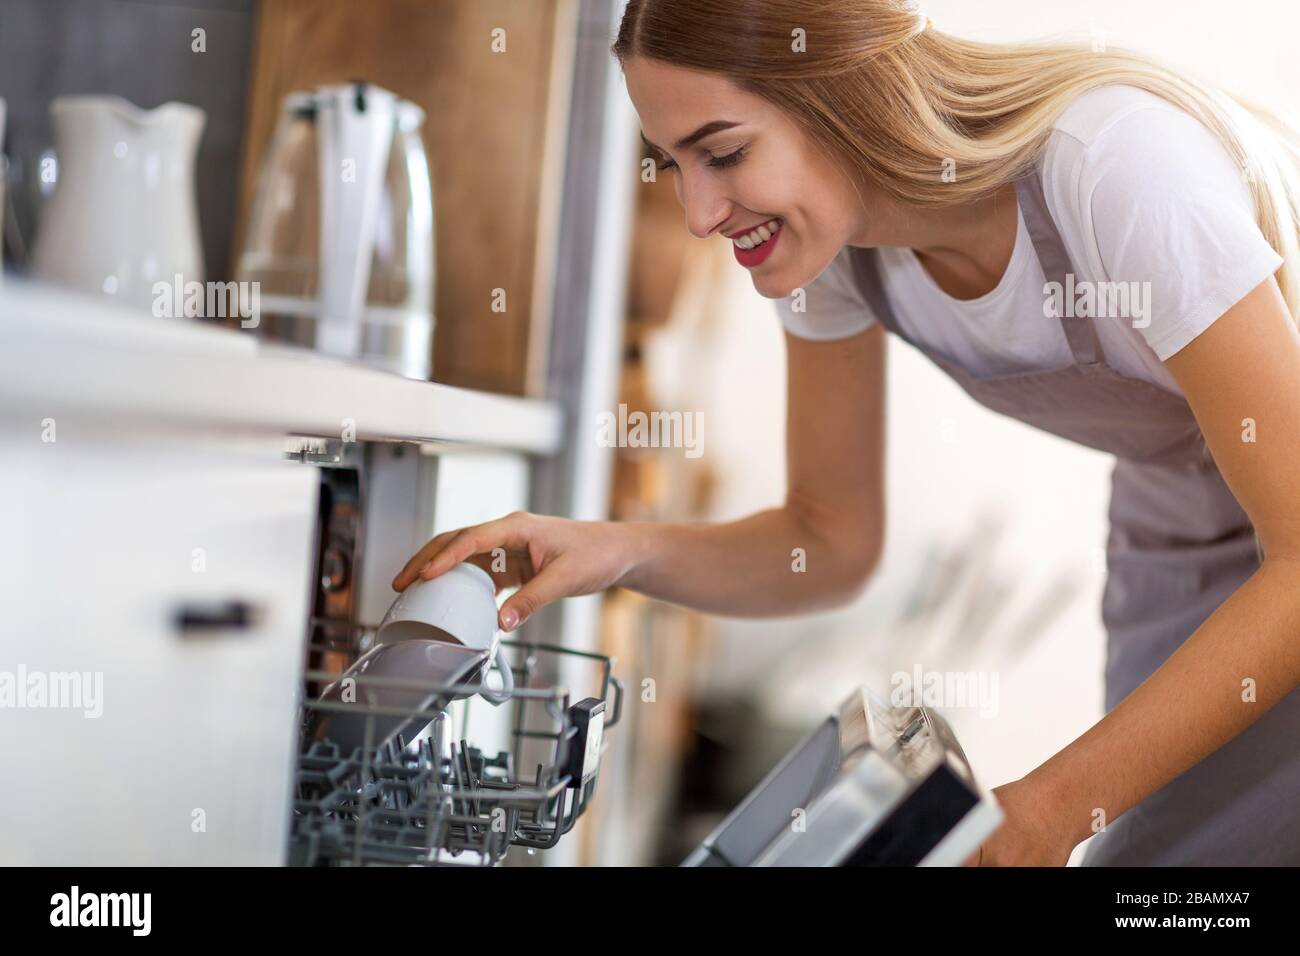 Young woman in the kitchen Stock Photo